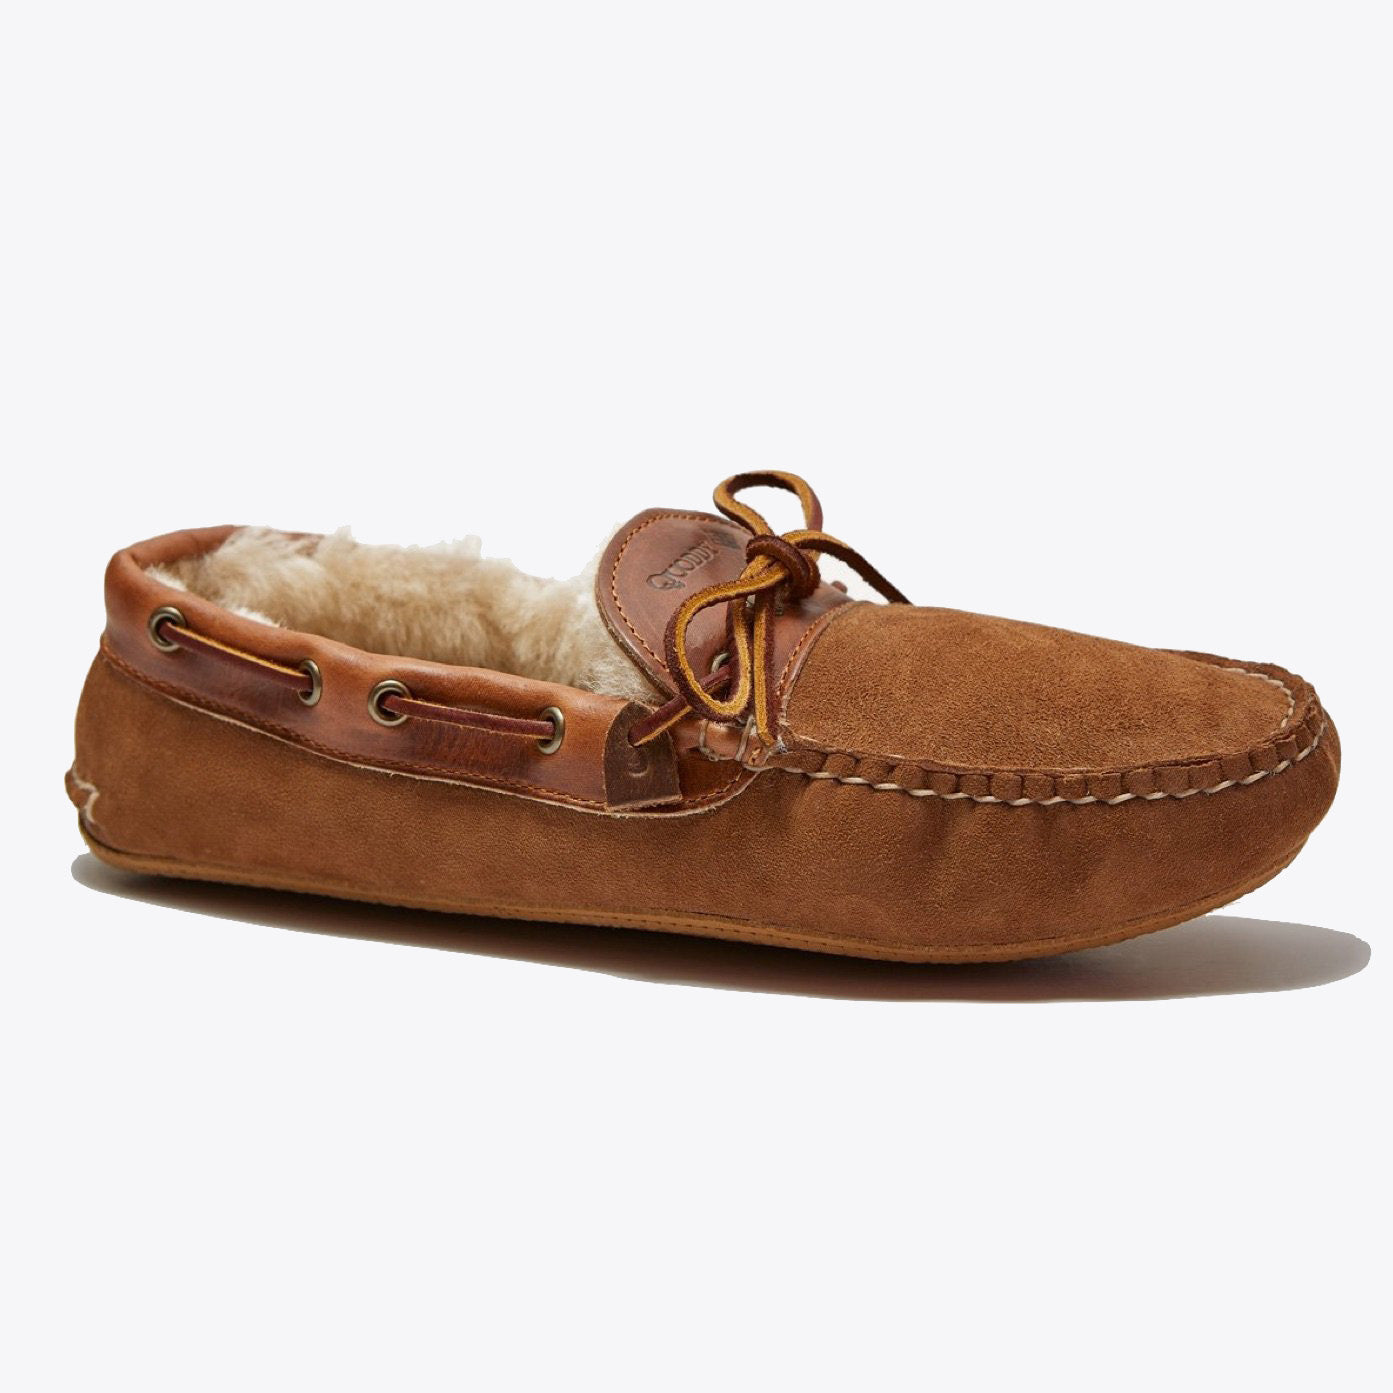 Quoddy Footwear - The Great Divide - Free Delivery On Quoddy Worldwide